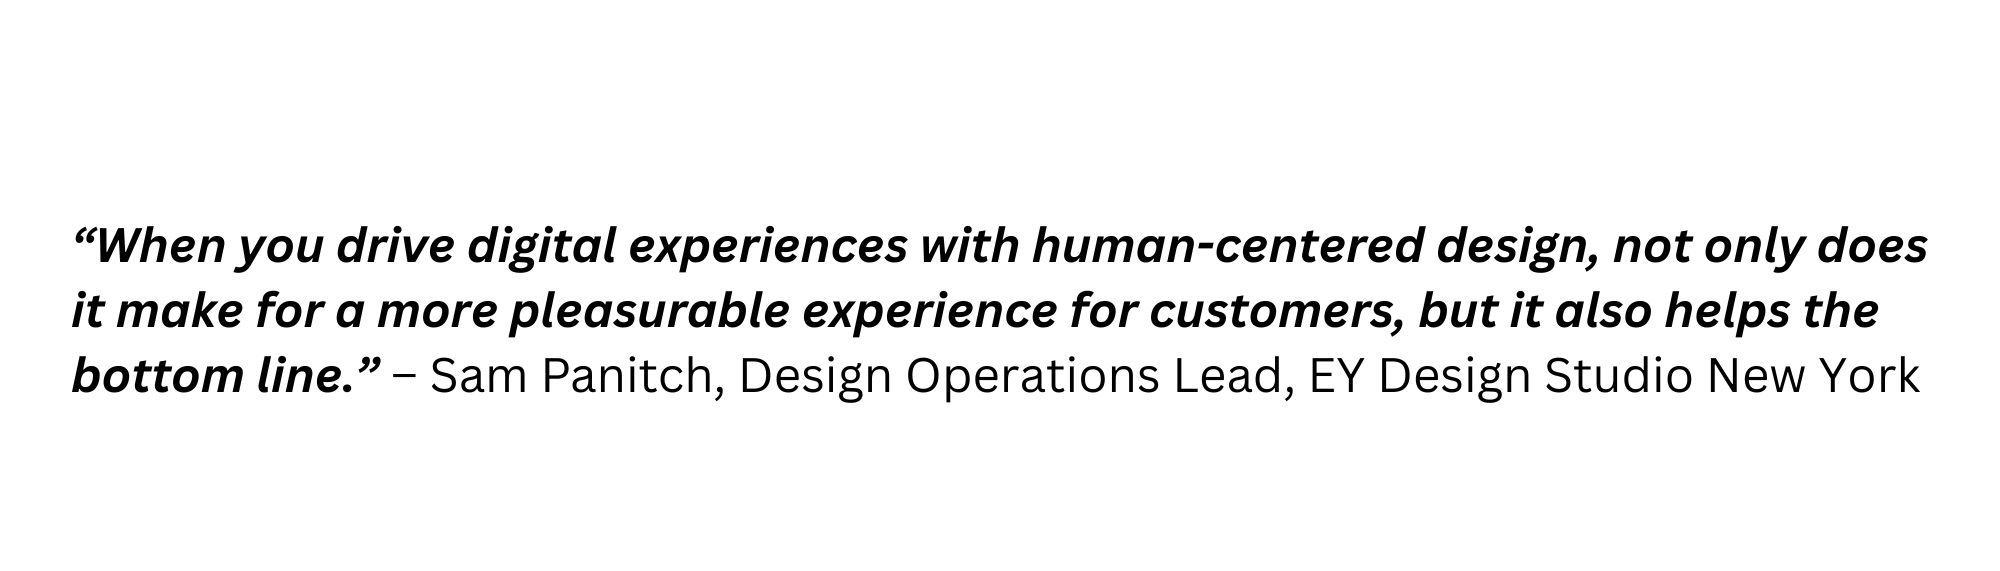 When you drive digital experiences with human-centered design, not only does it make for a more pleasurable experience for customers, but it also helps the bottom line. – Sam Panitch, Design Operations Lead, EY Design Studio New York 